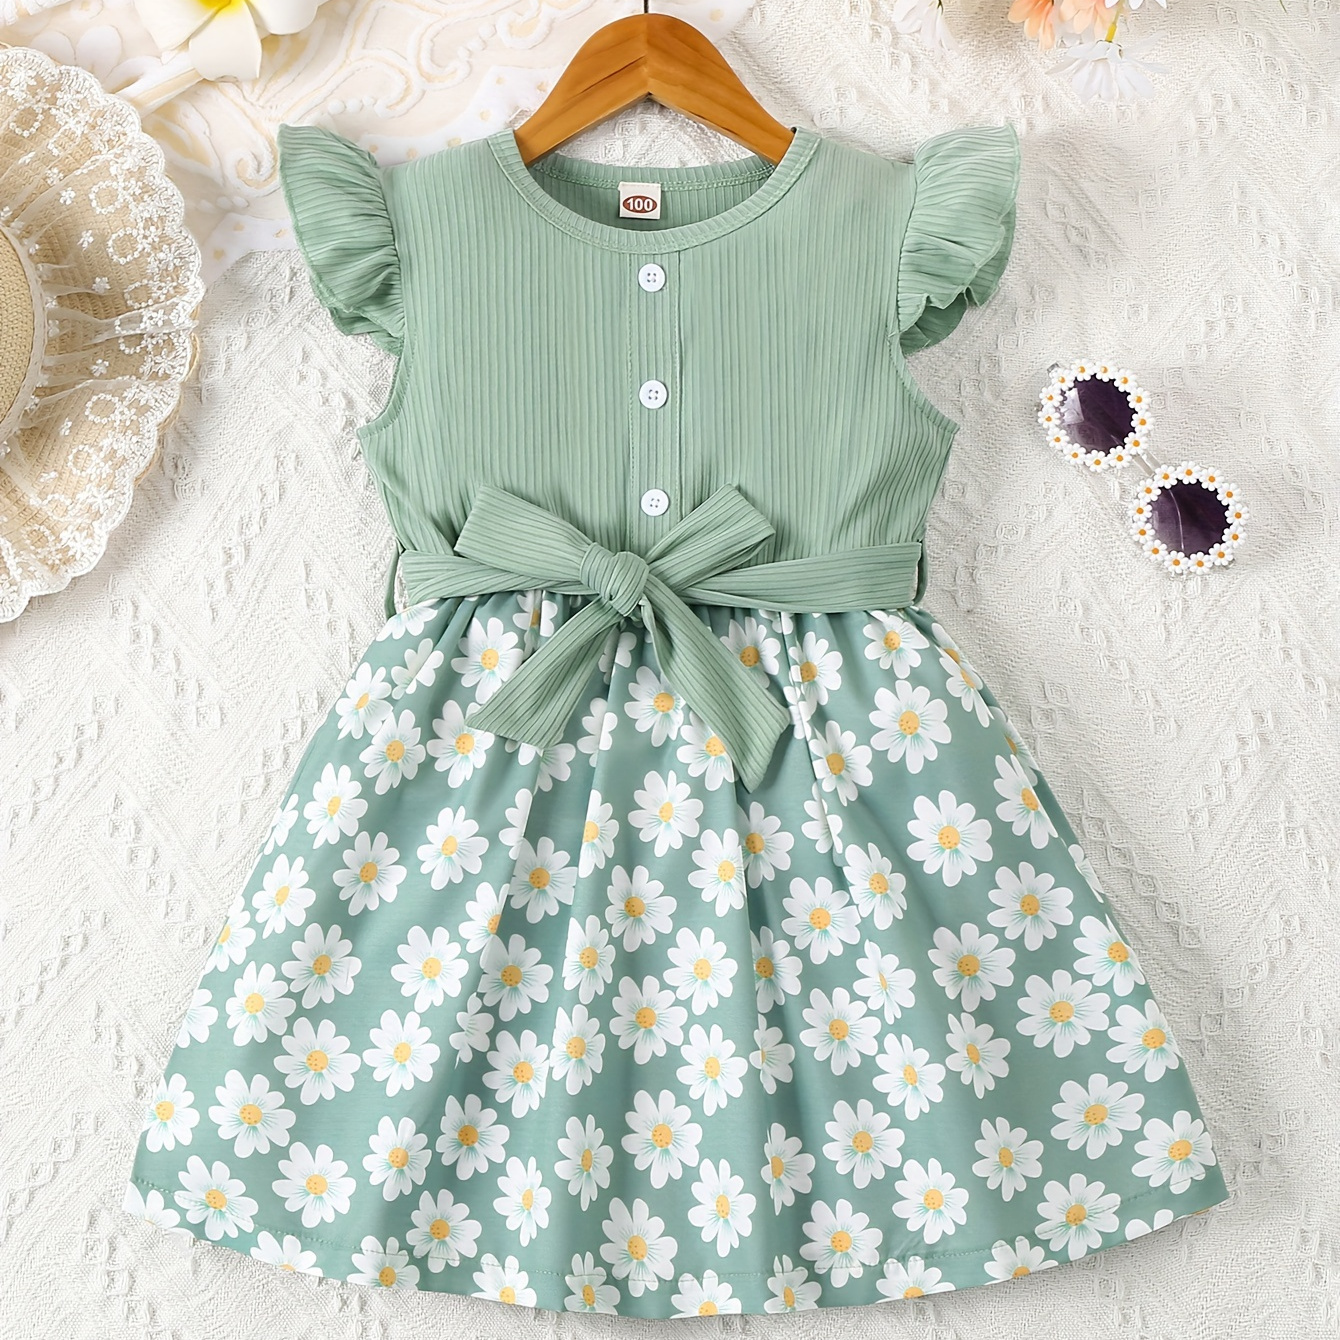 

Sweet Daisy Print Ruffle Dress For Girls, Cute Splicing Comfy Dresses For Holiday/ Summer/ Party